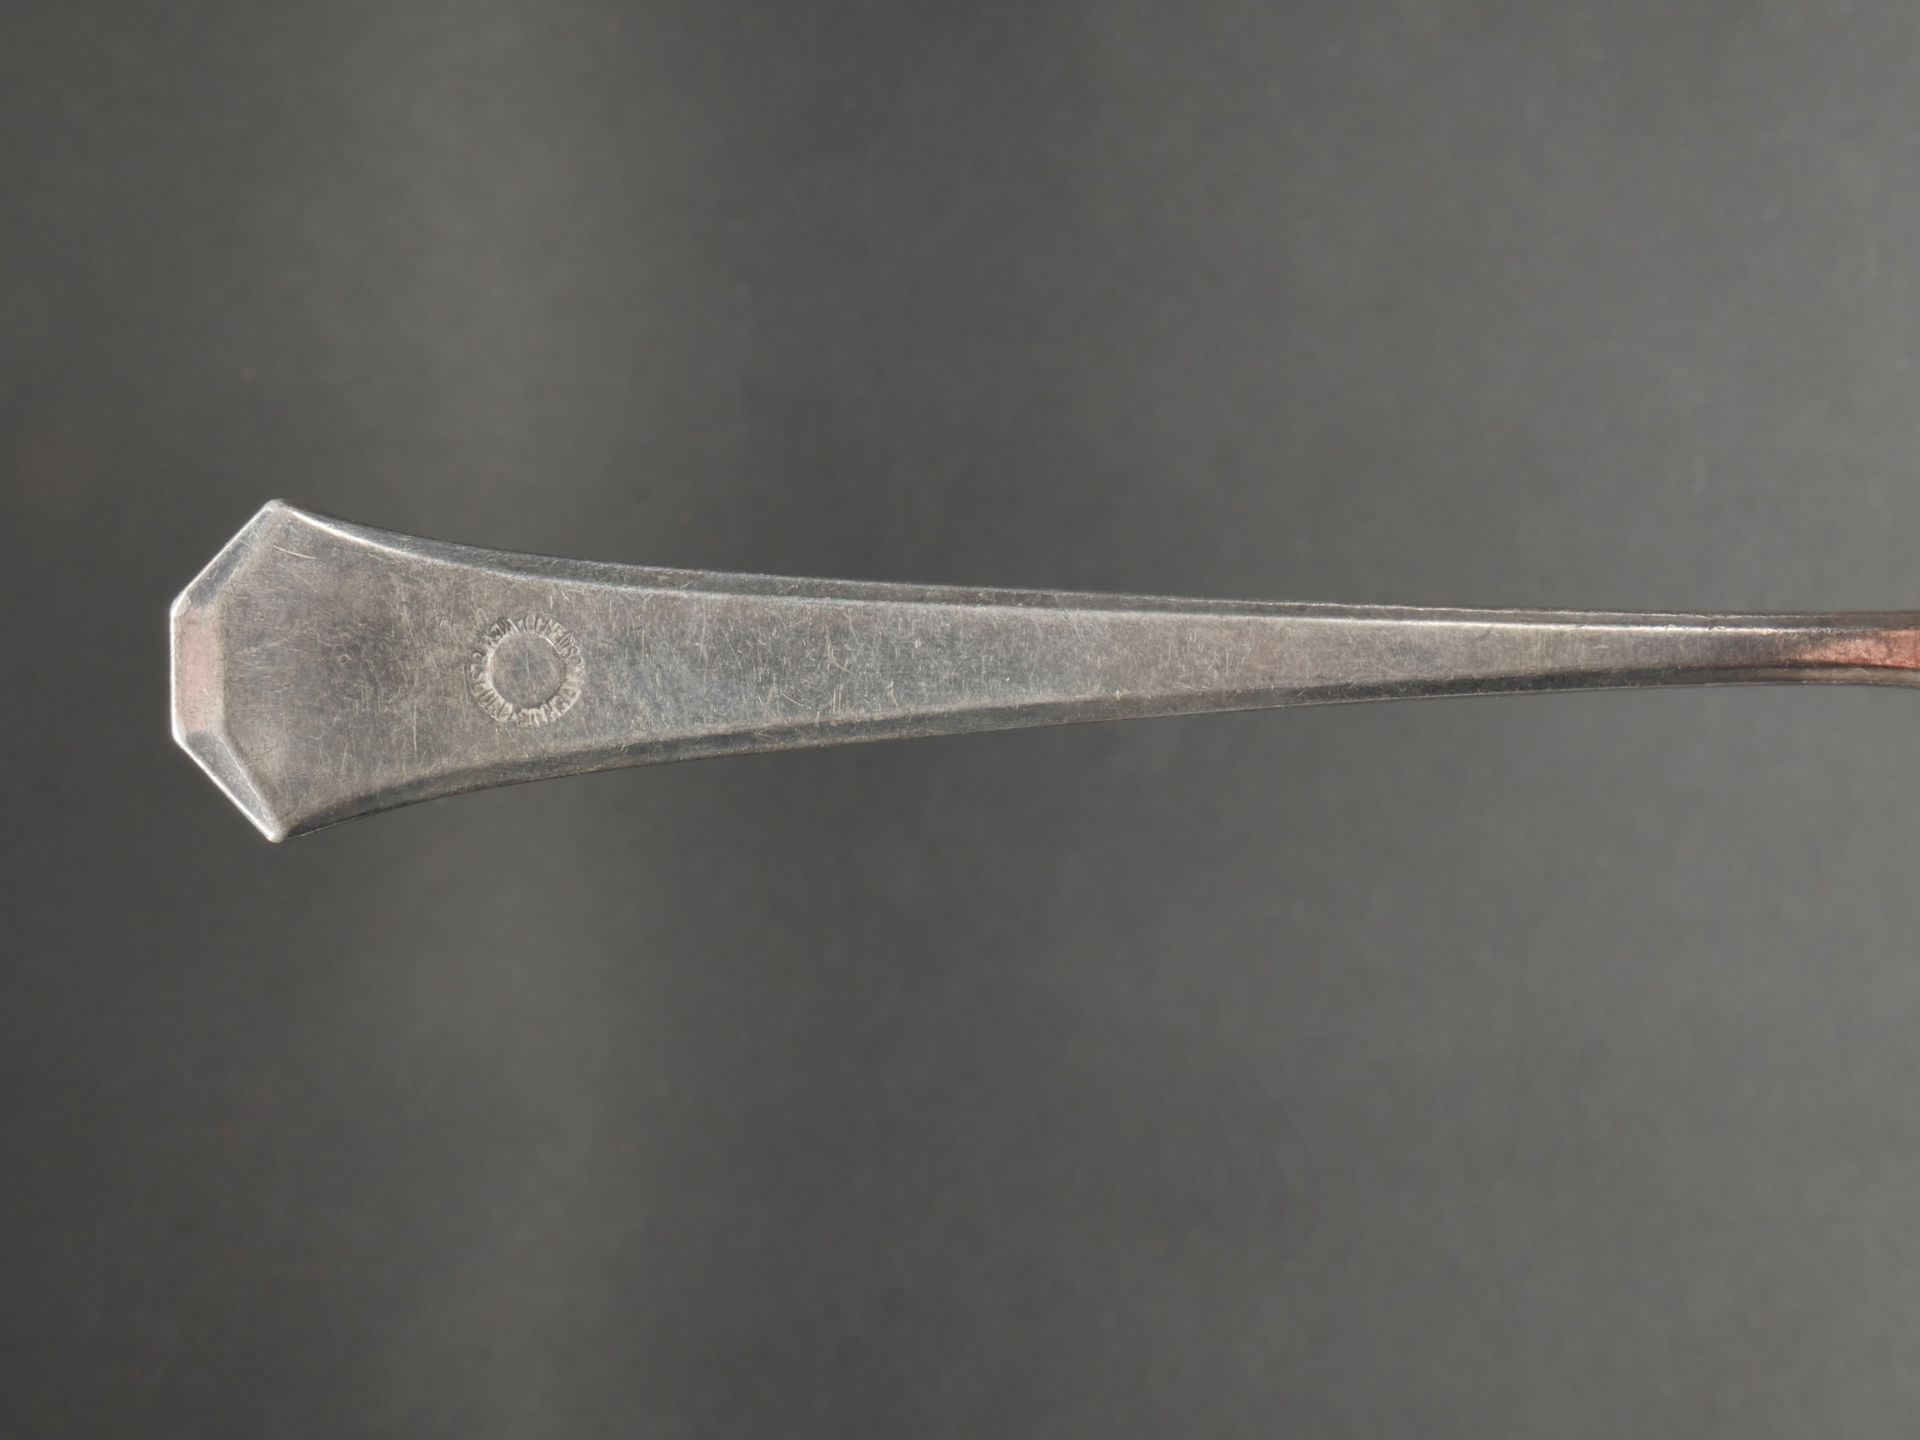 Cuillere SS Wewelsburg. SS Wewelsburg spoon. - Image 5 of 5